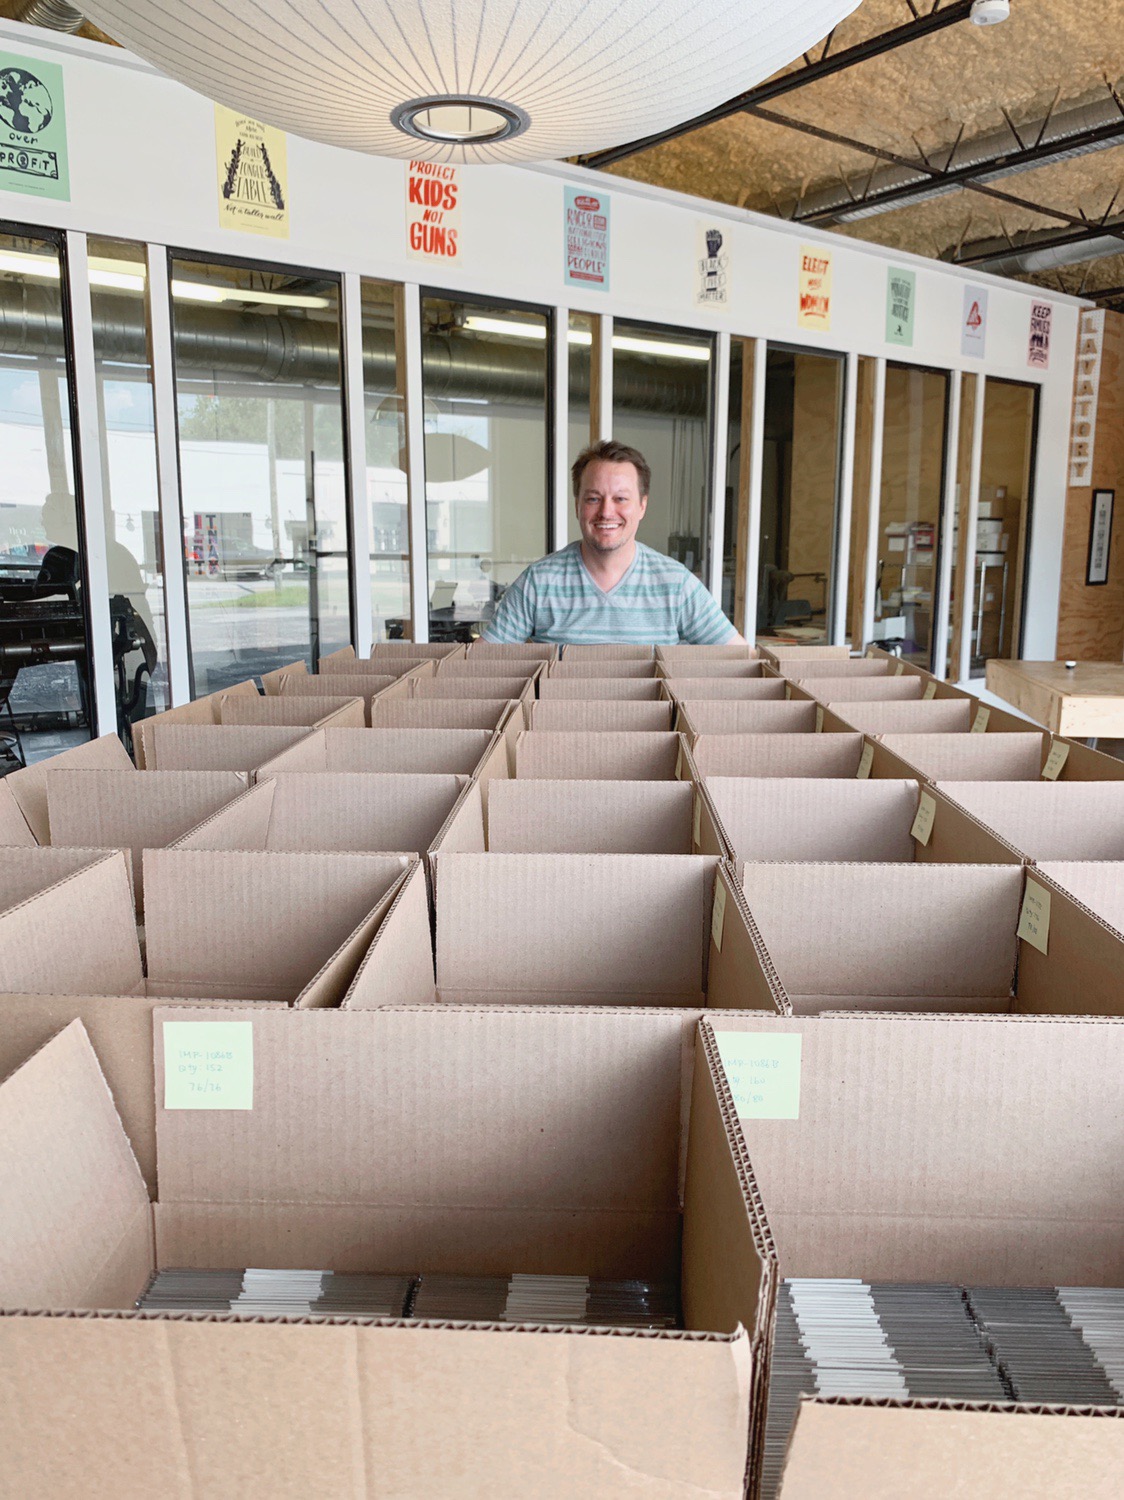 Team member stands at the back of a table filled with boxes that contain greeting cards assembled for a large order